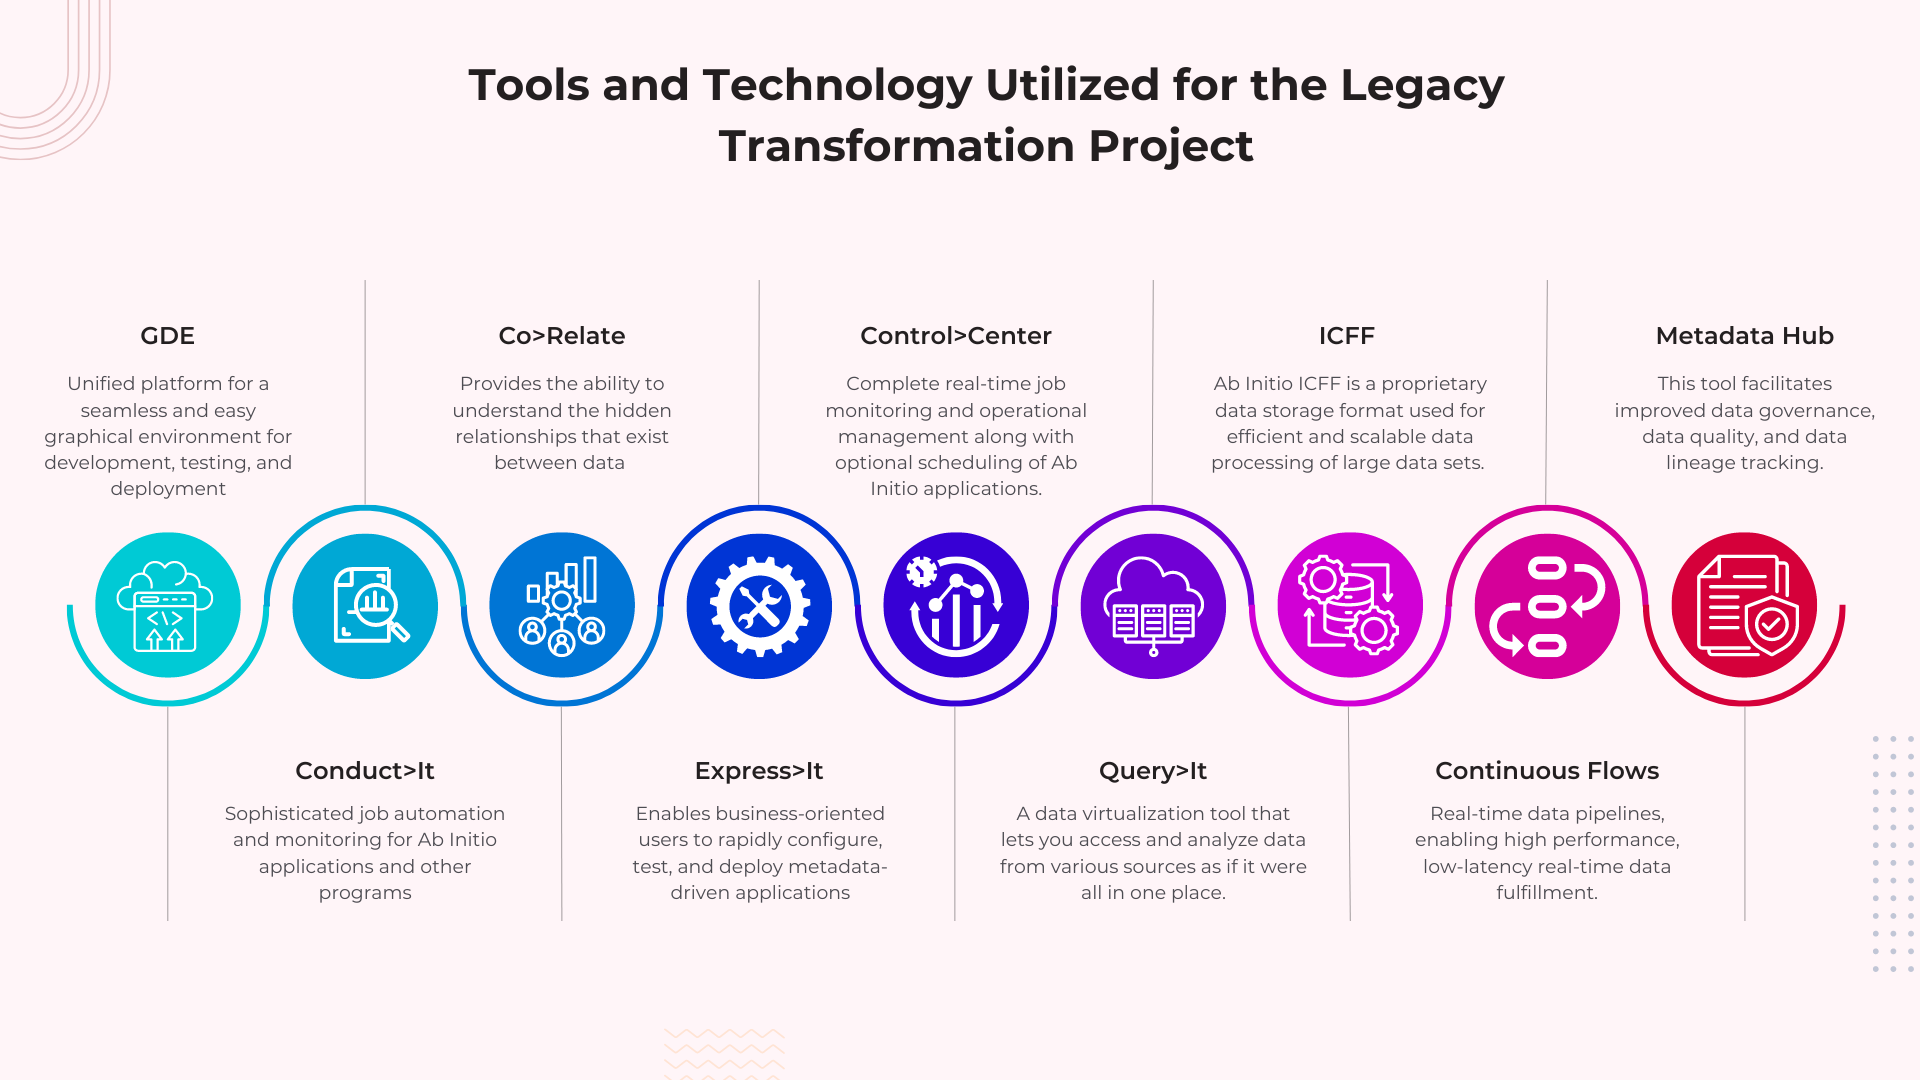 Tools and Technology Utilized for the Legacy Transformation Project